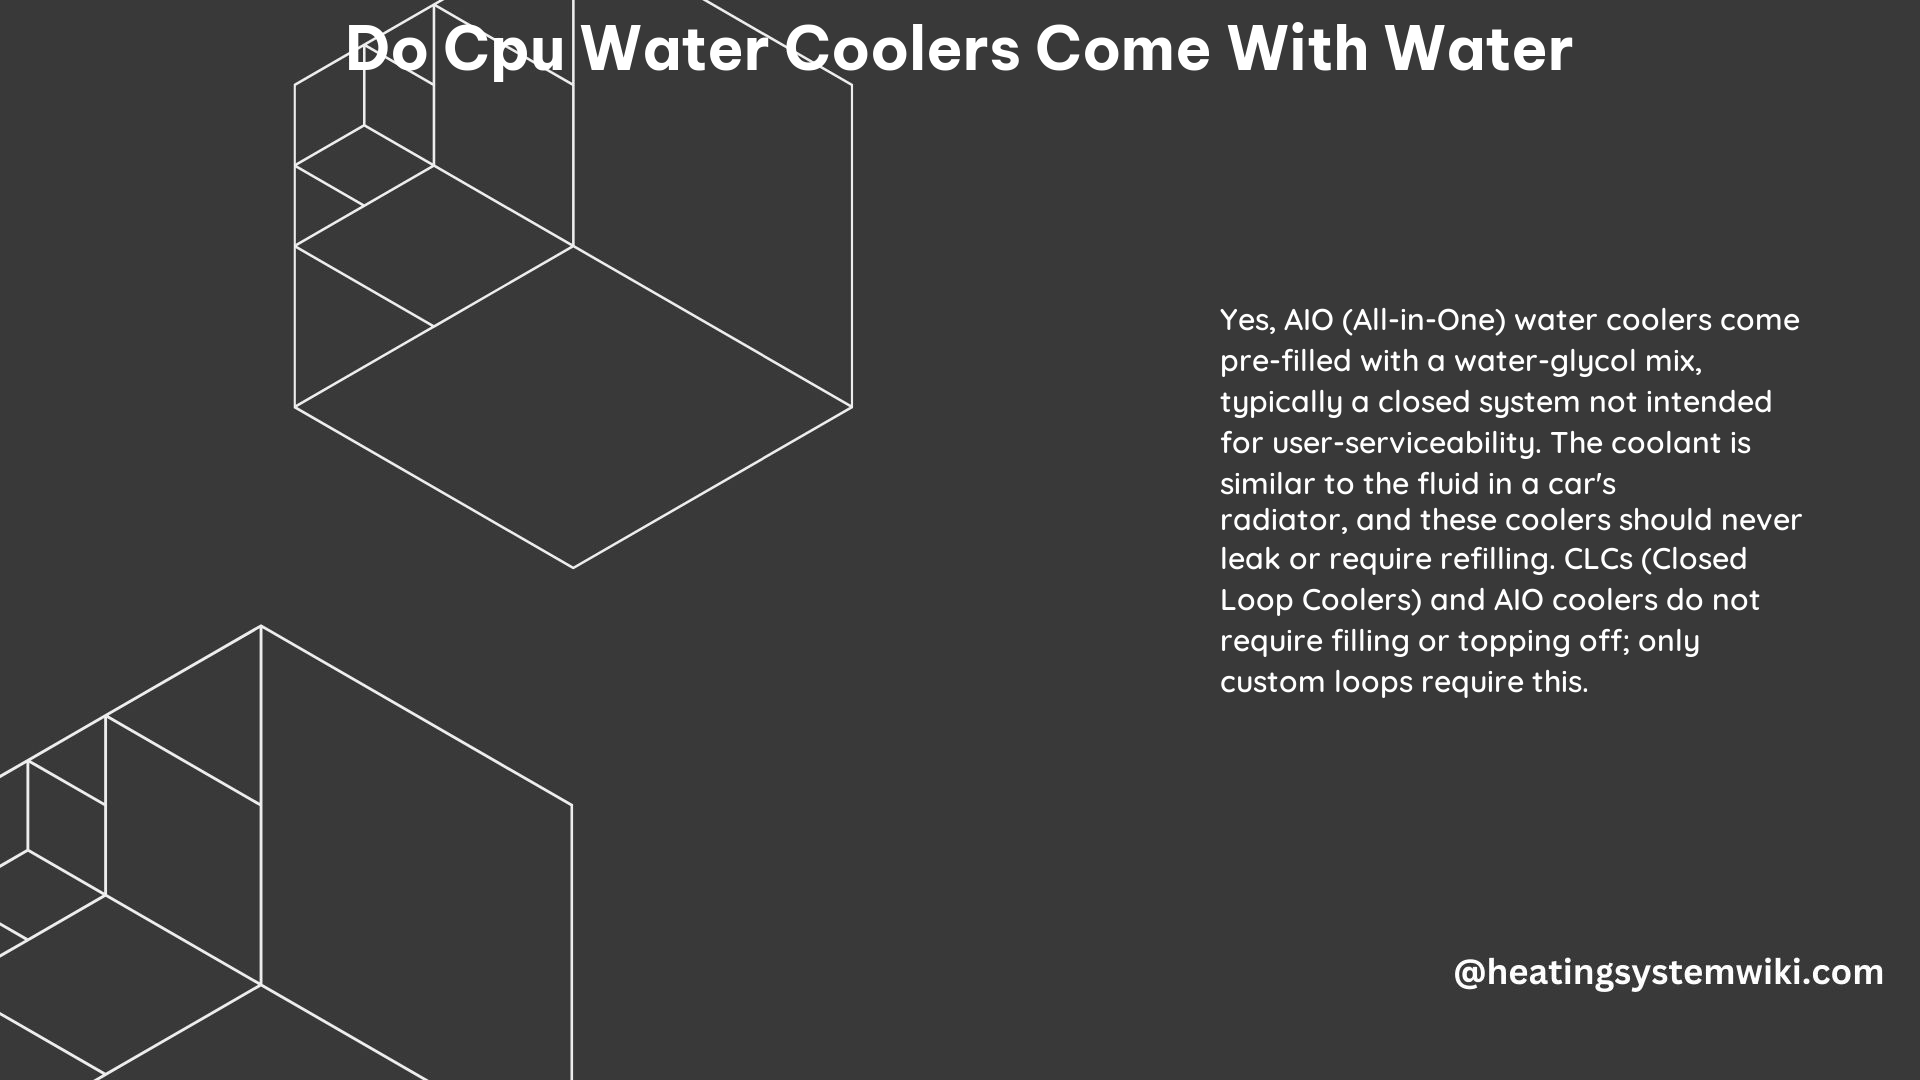 Do CPU Water Coolers Come With Water